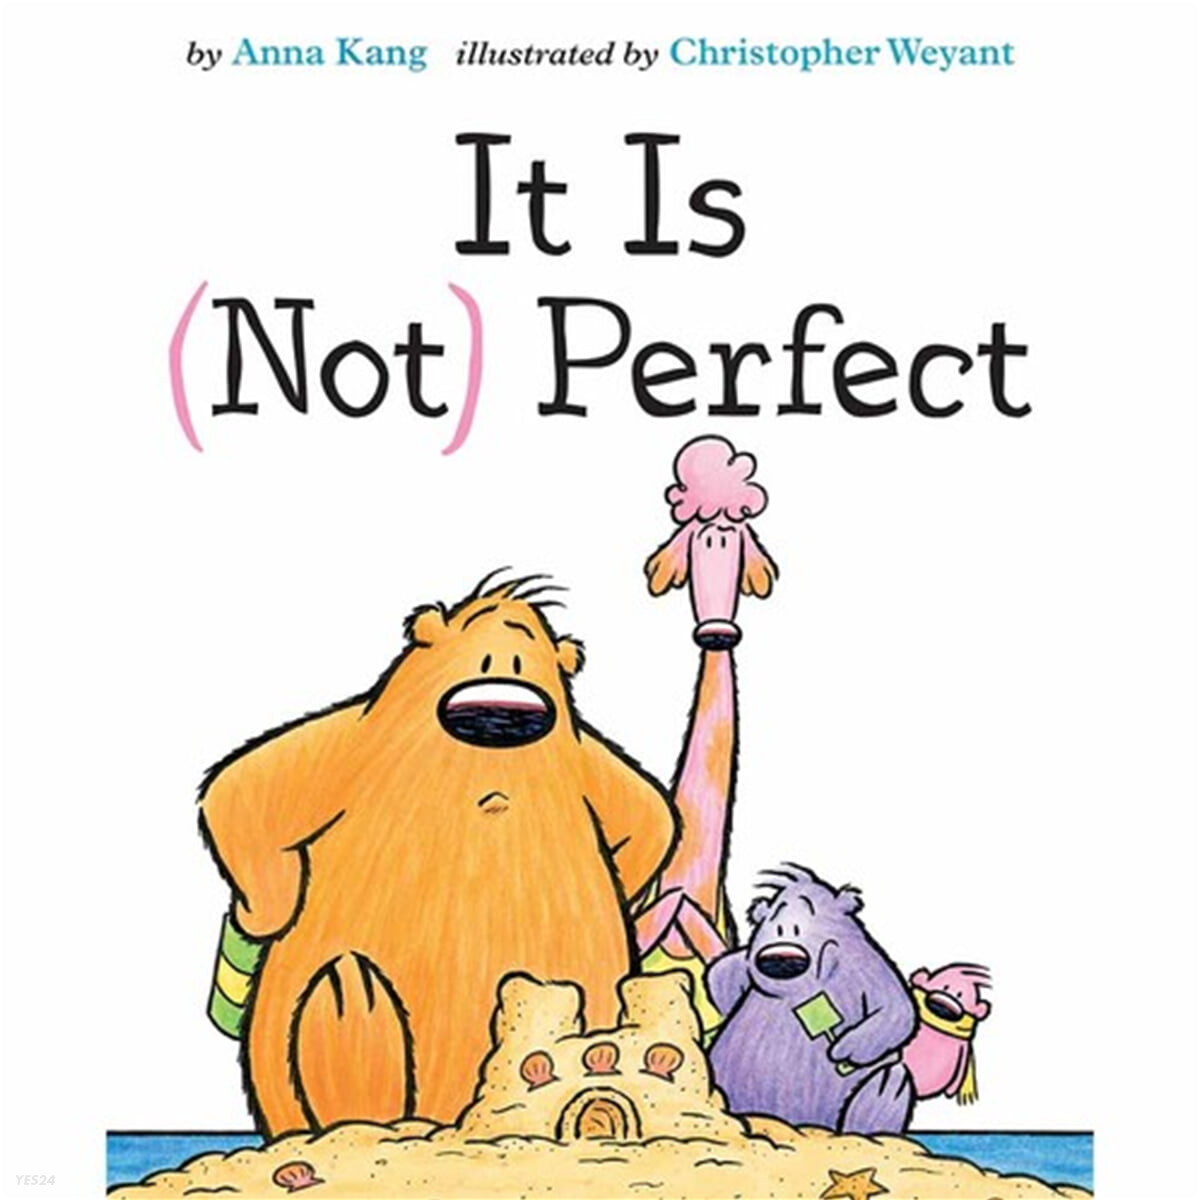 It is Not Perfect